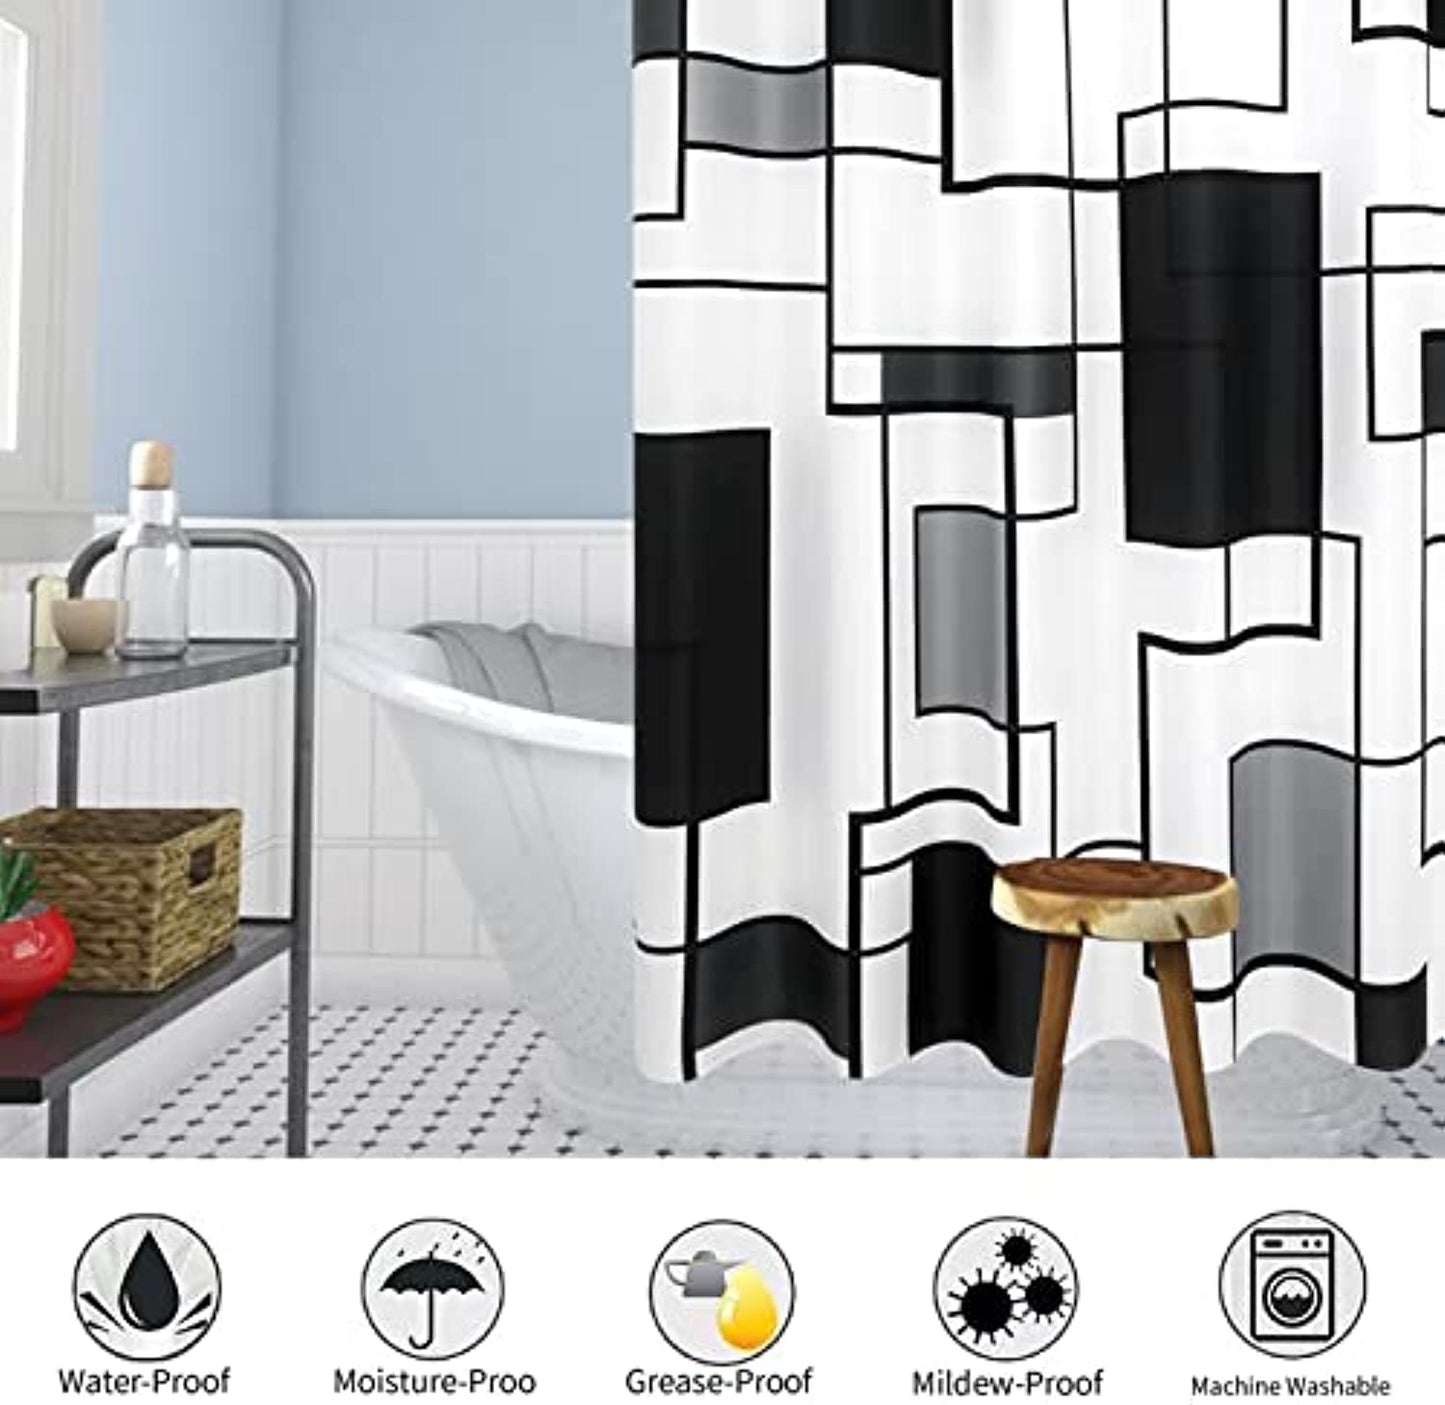 Black and White Shower Curtain Black Shower Curtain for Bathroom Grey and White Bathromm Shower Curtain Set Water Repellent and Washable Bath Curtain with Modern Style for Hotels Bathtubs 72x72